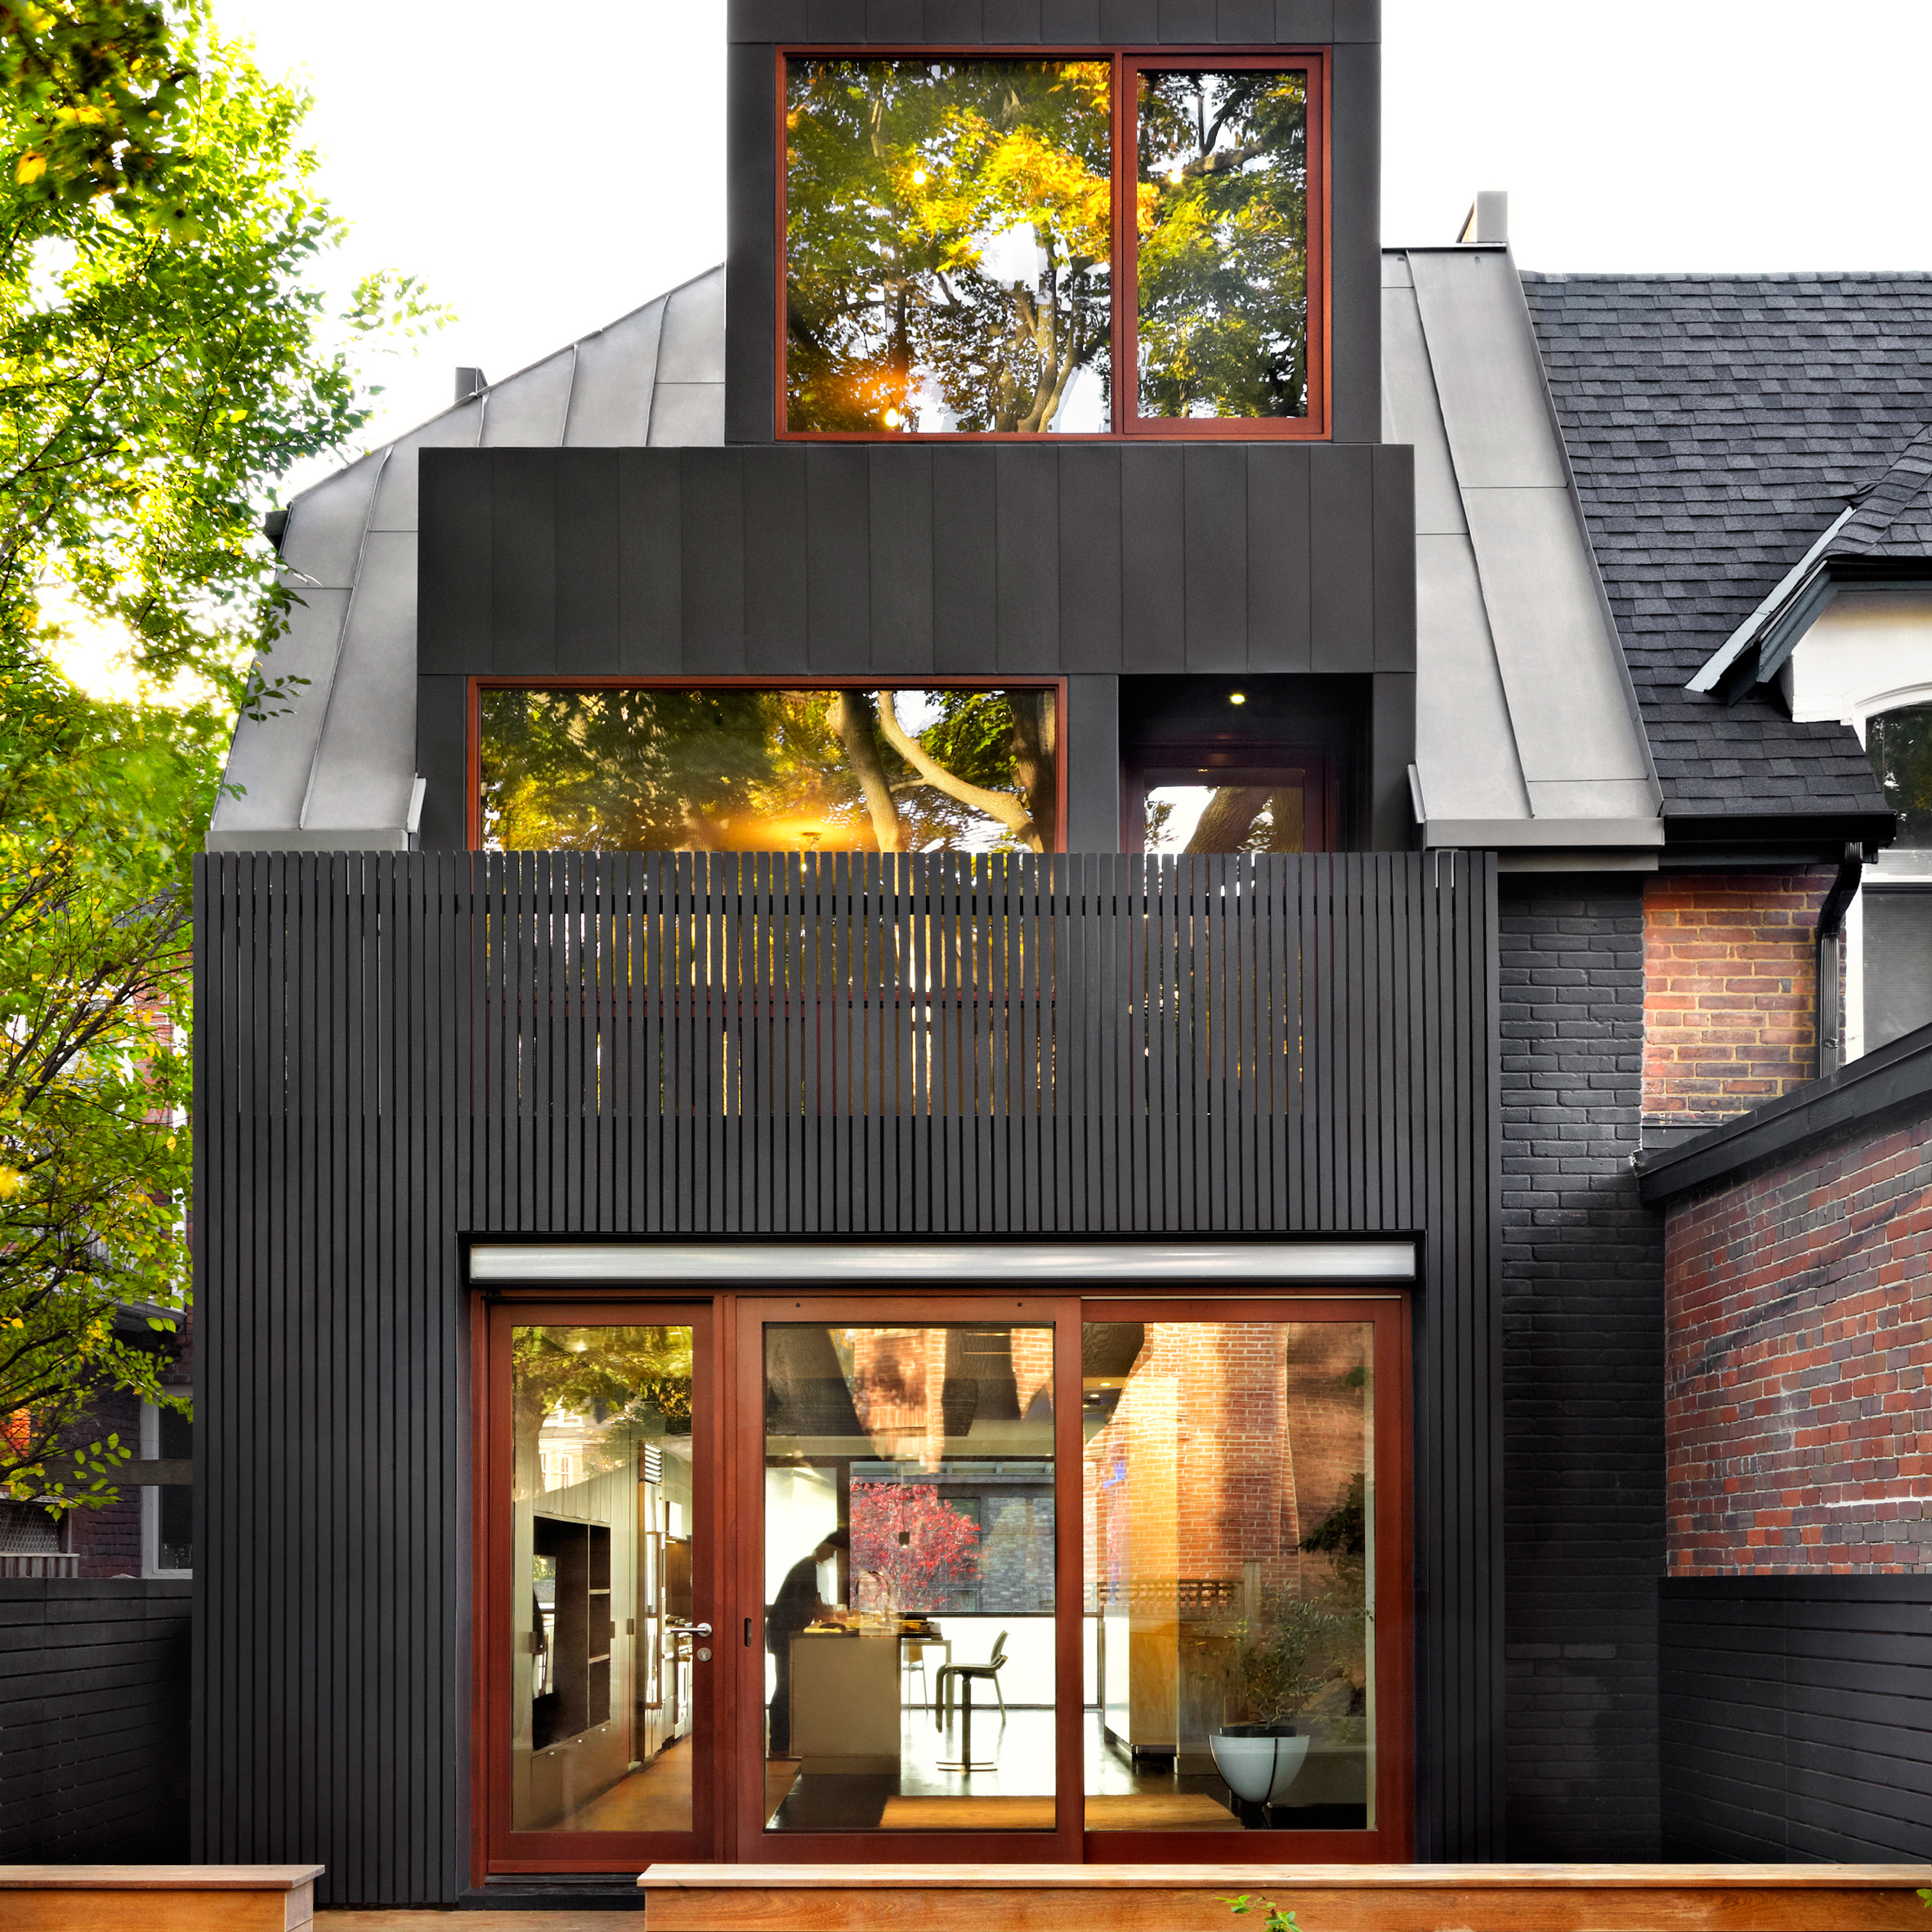 +TongTong uses grey and black zinc to transform a Victorian home in Toronto